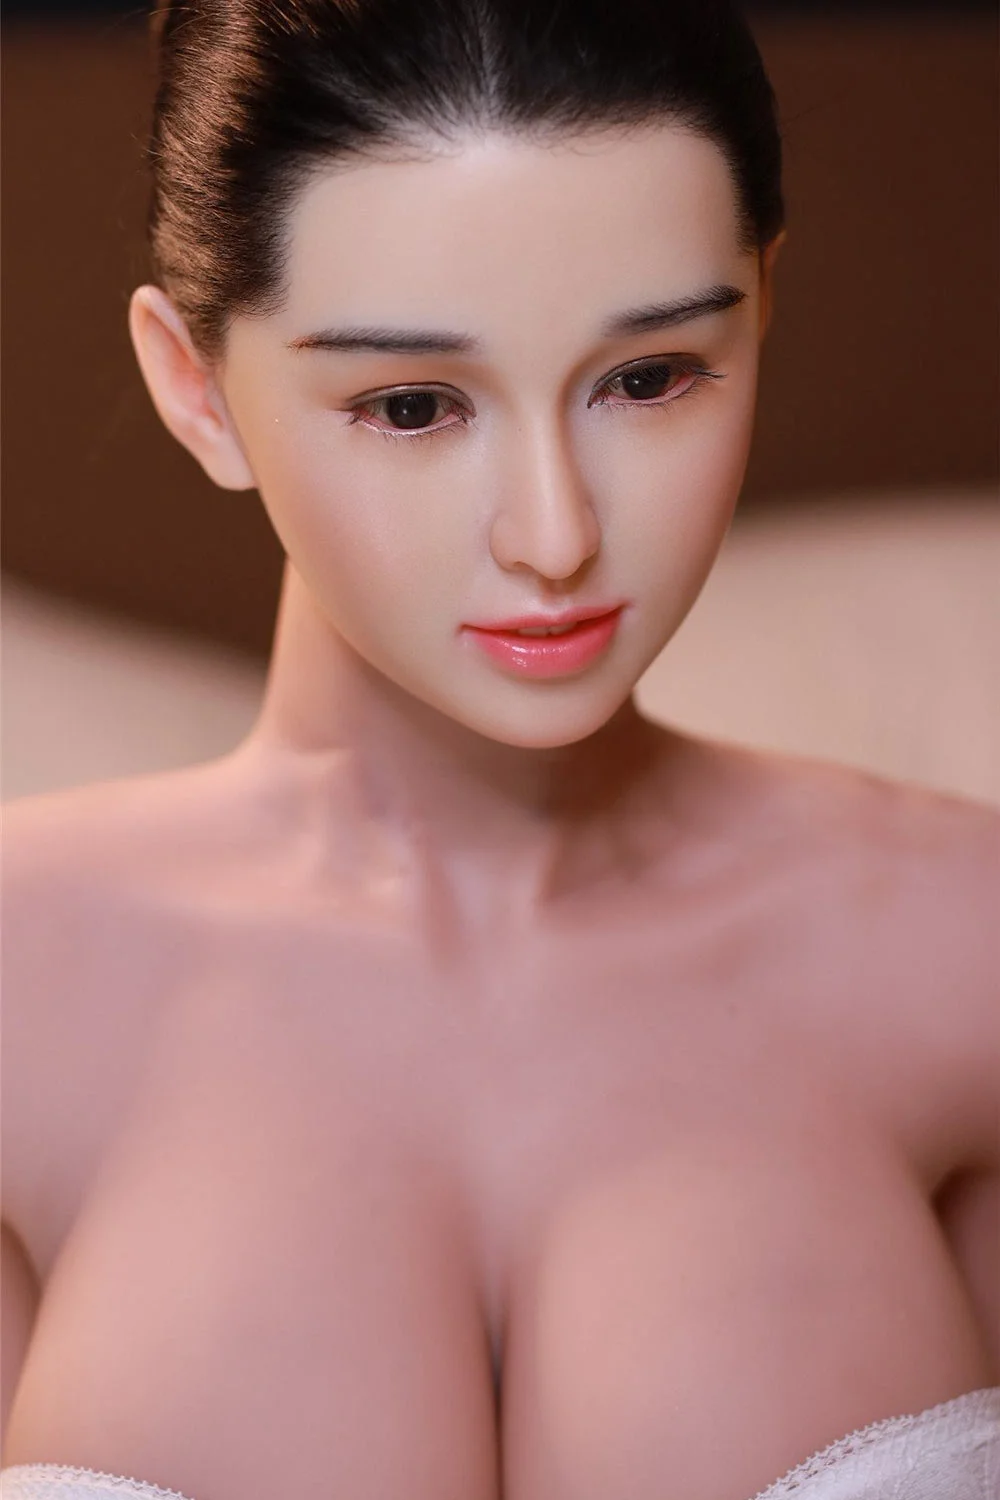 Sex doll with red lips